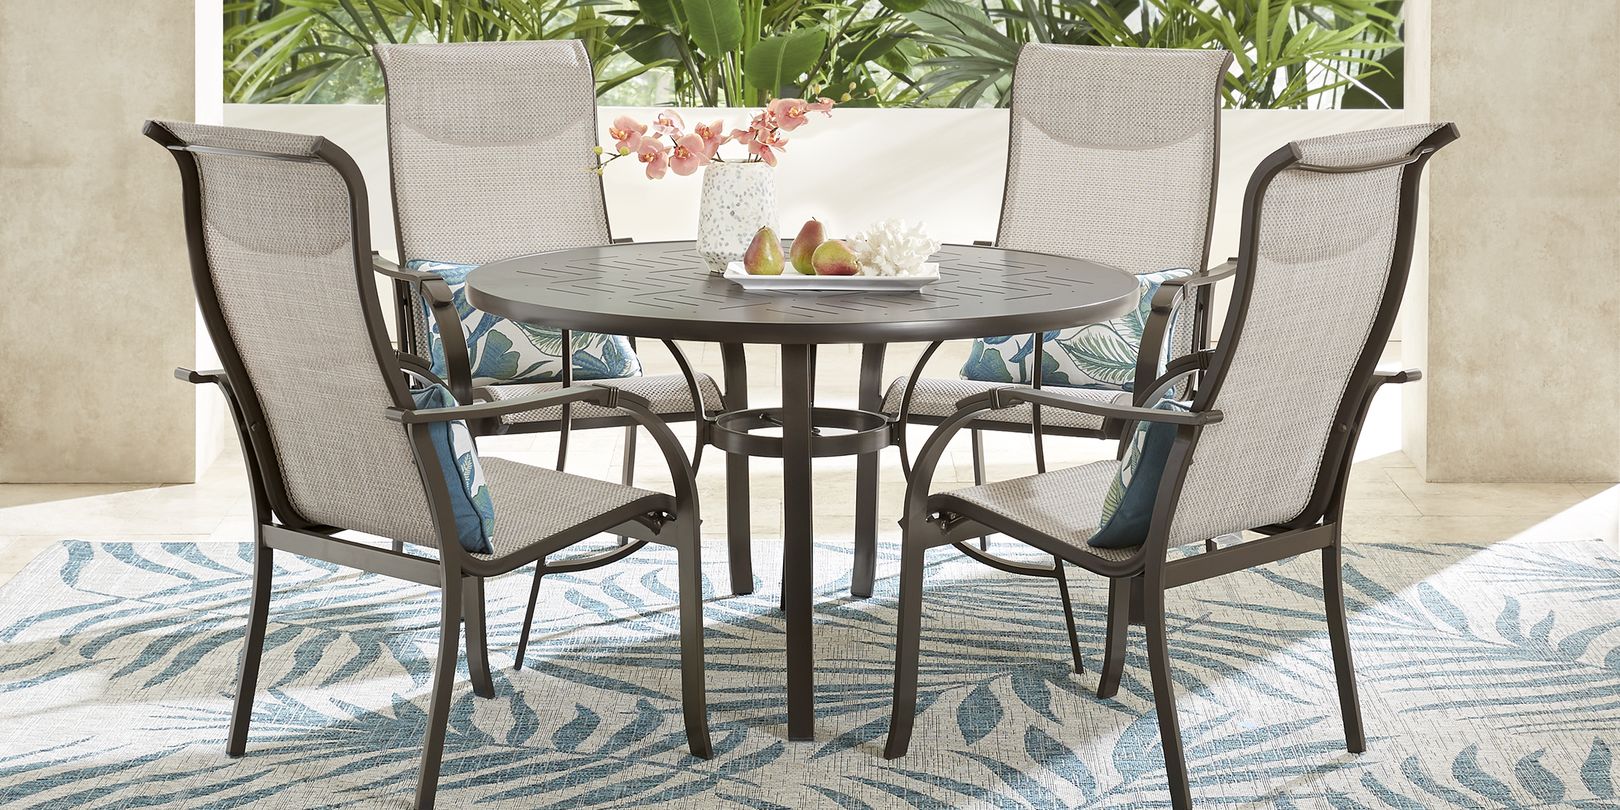 photo of round metal dining table and chairs